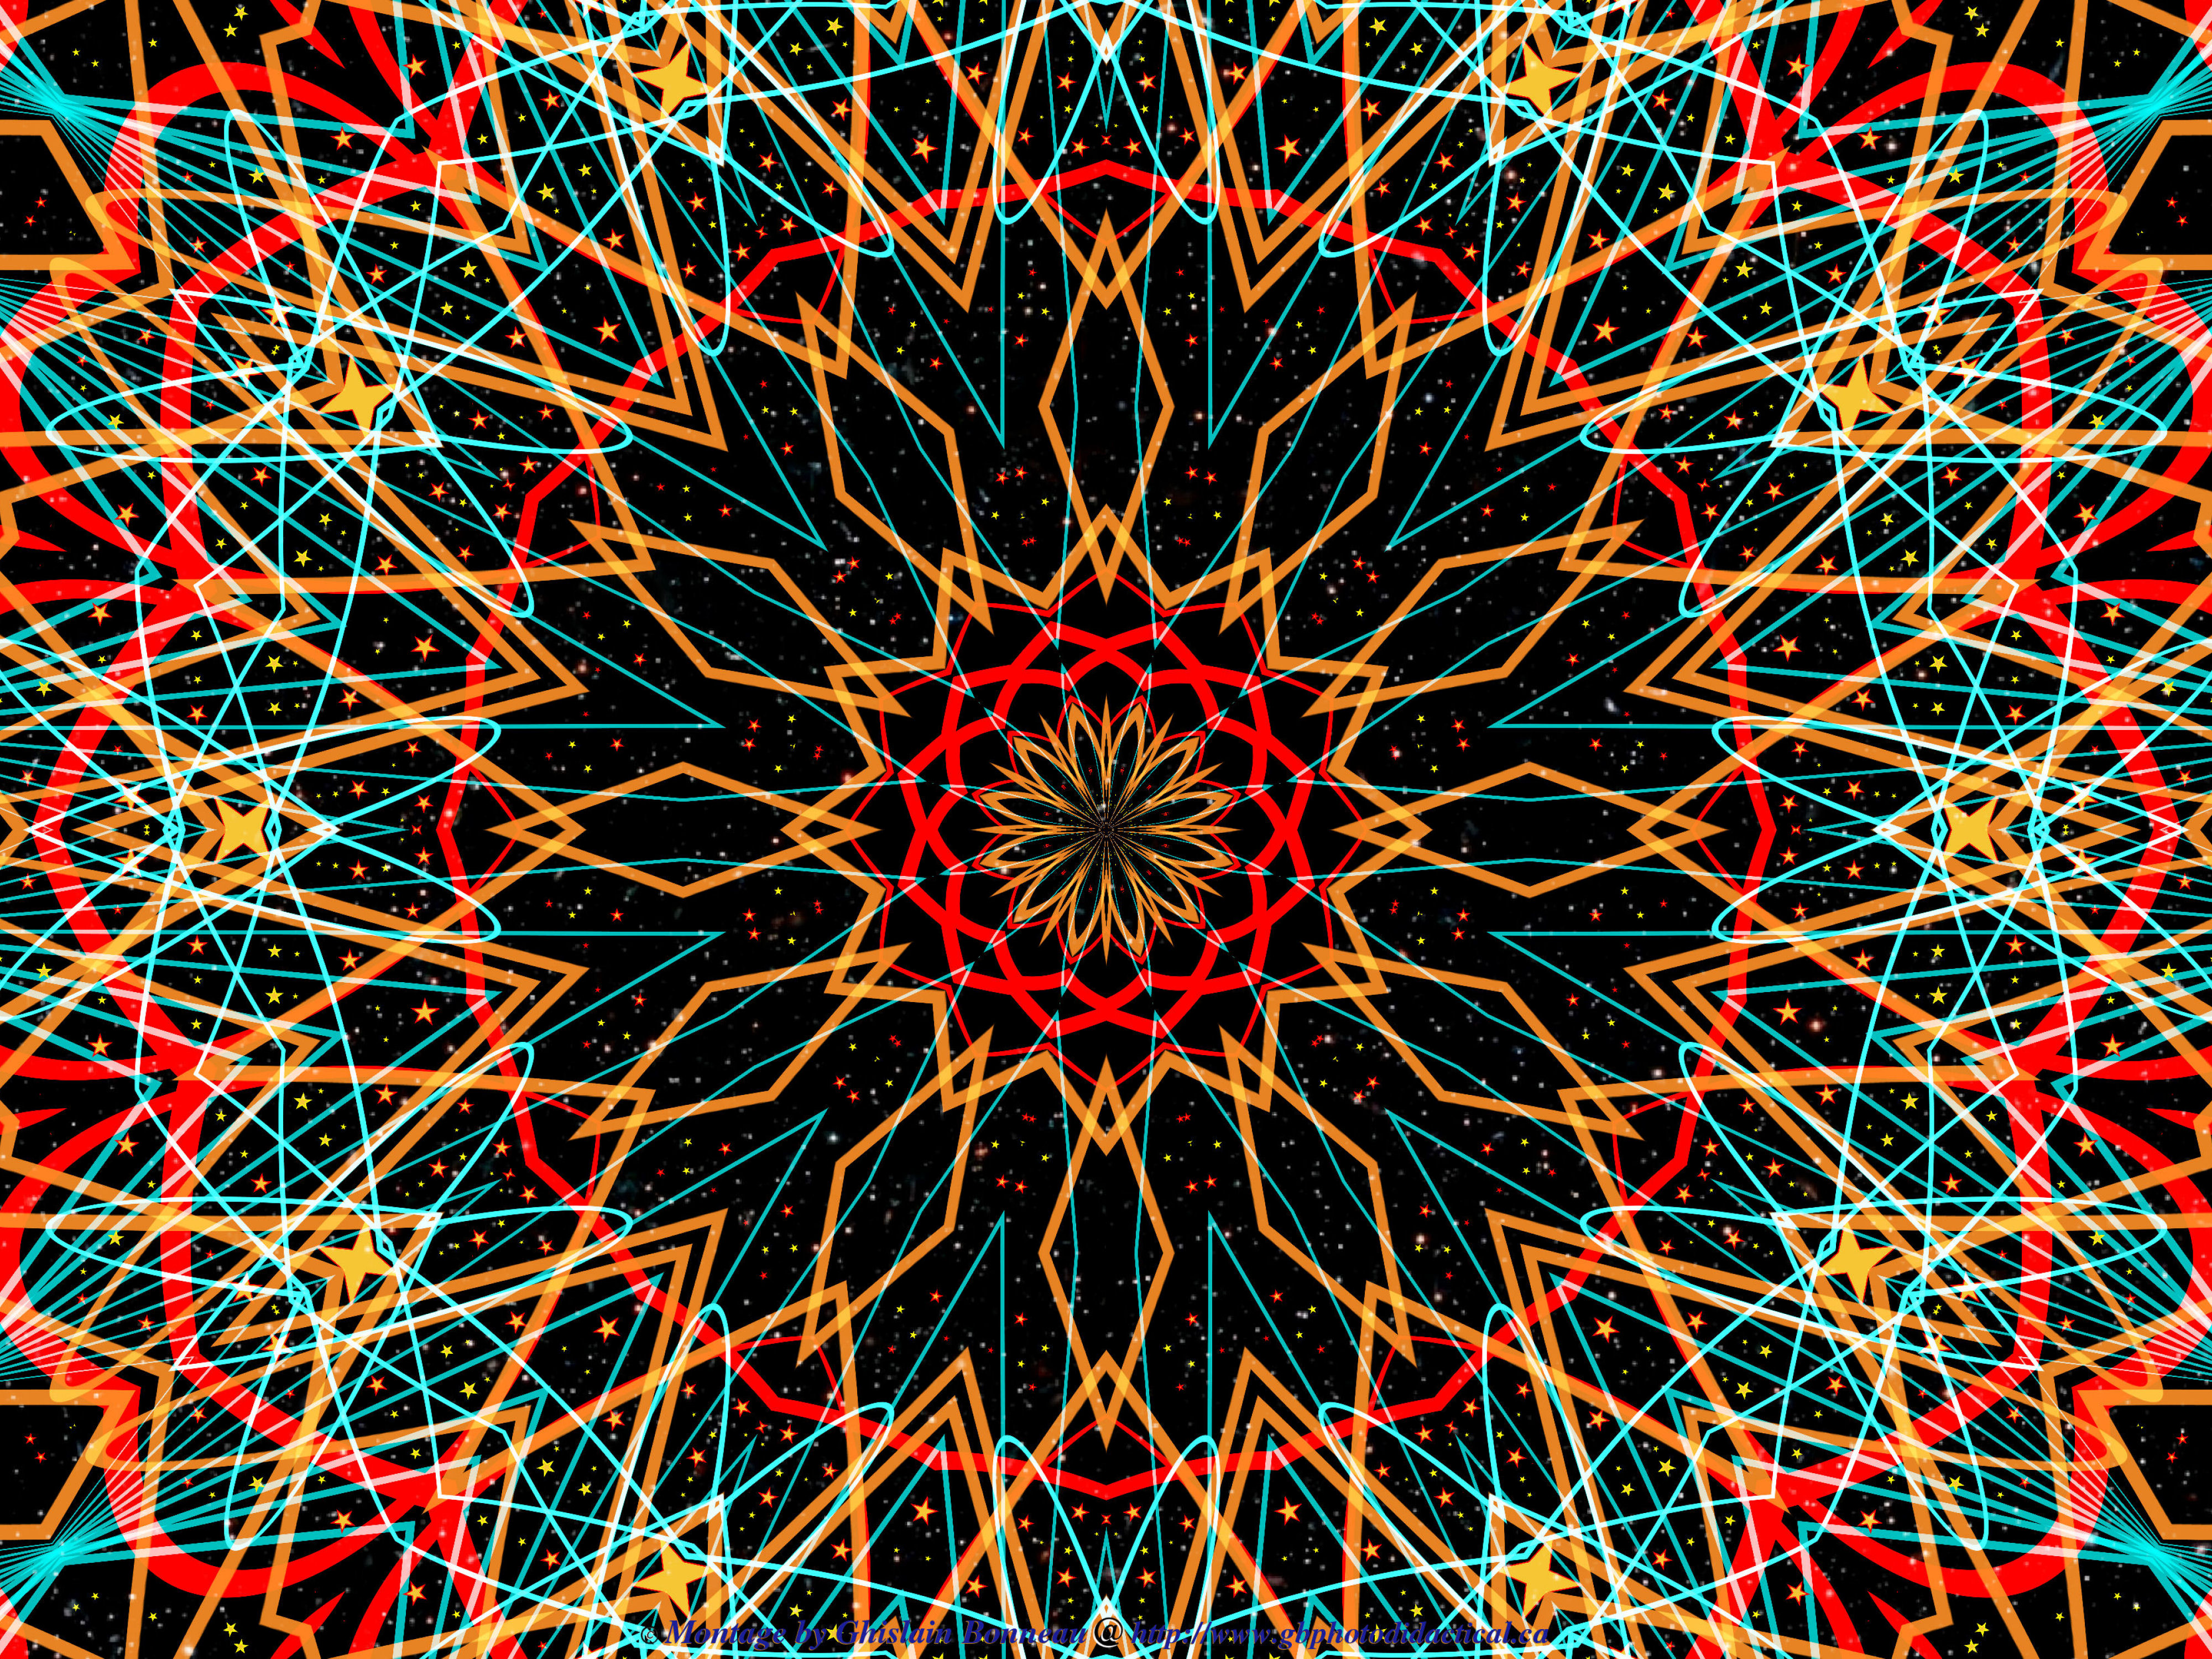 Trippy Kaleidoscope Background Imgkid Com The HD Wallpapers Download Free Images Wallpaper [wallpaper981.blogspot.com]